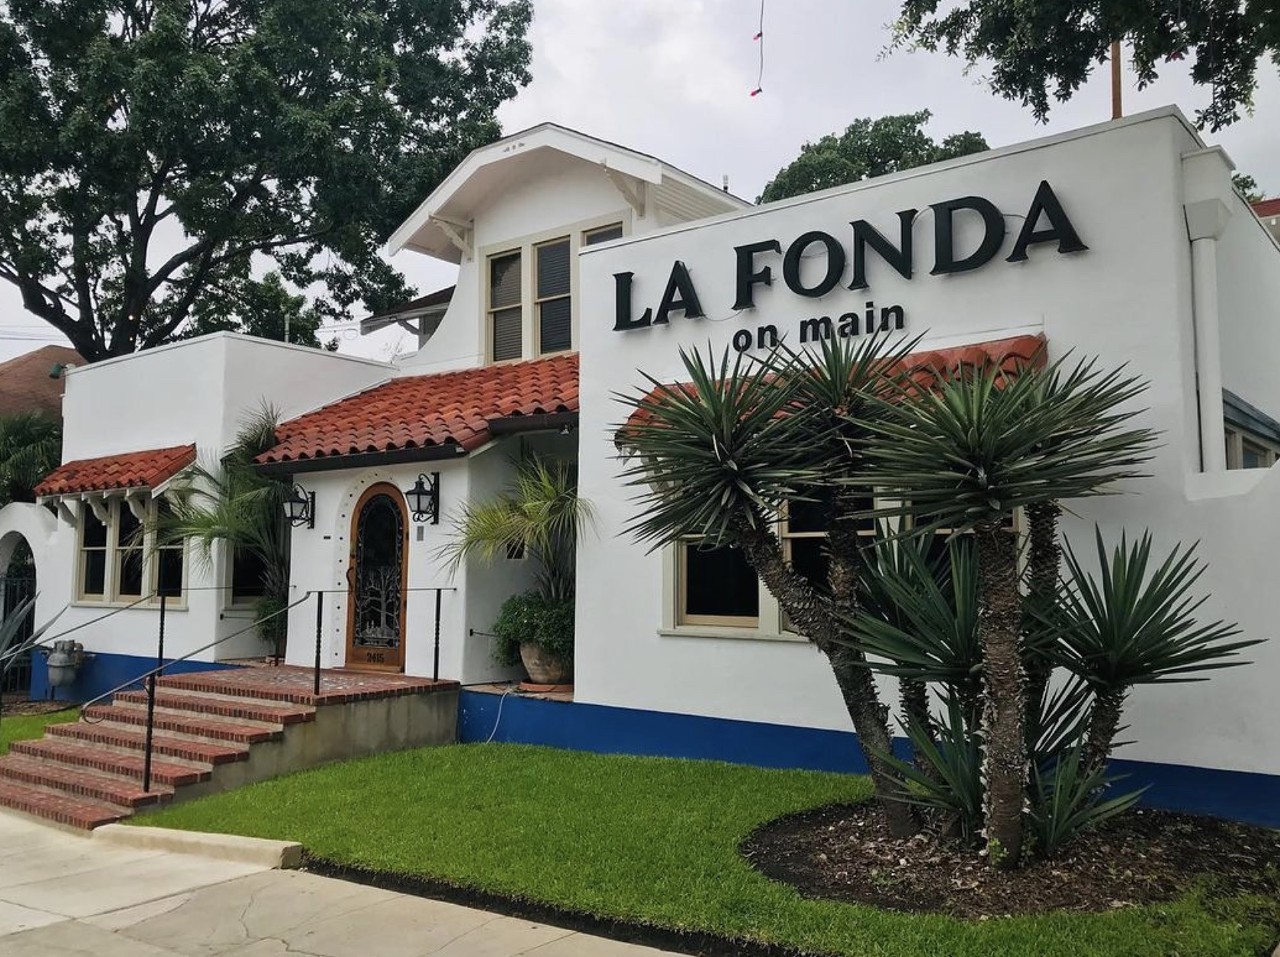 Patronize old restaurants
If a restaurant’s been open several decades, it’s probably for a good reason. From La Fonda to Schilo’s, San Antonio has a bevy of long-running establishments to choose from.